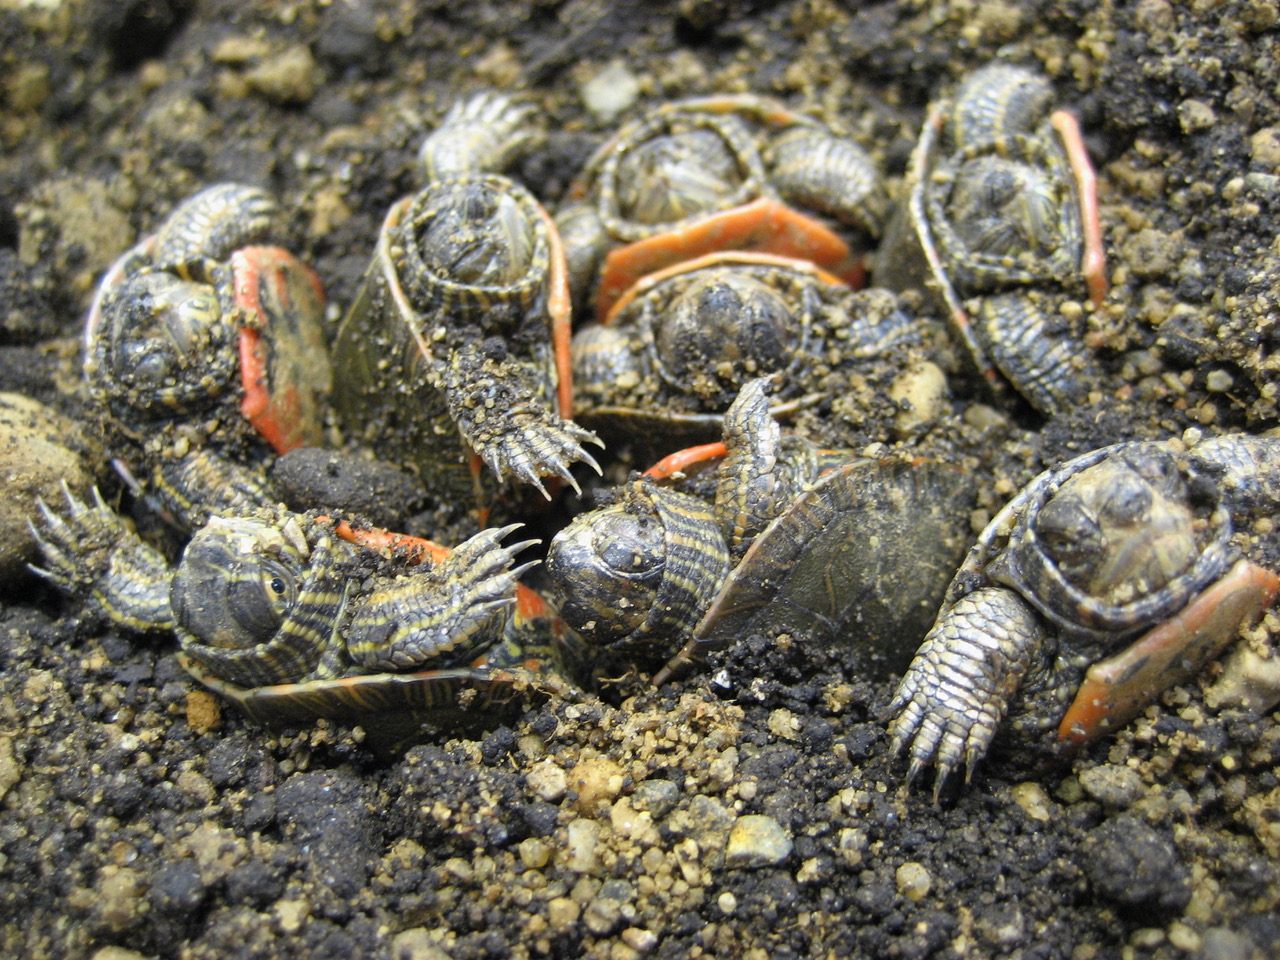 Painted turtle hatchlings can spend a winter burrowed in the sand where they're born, and freeze tolerance helps them survive it.